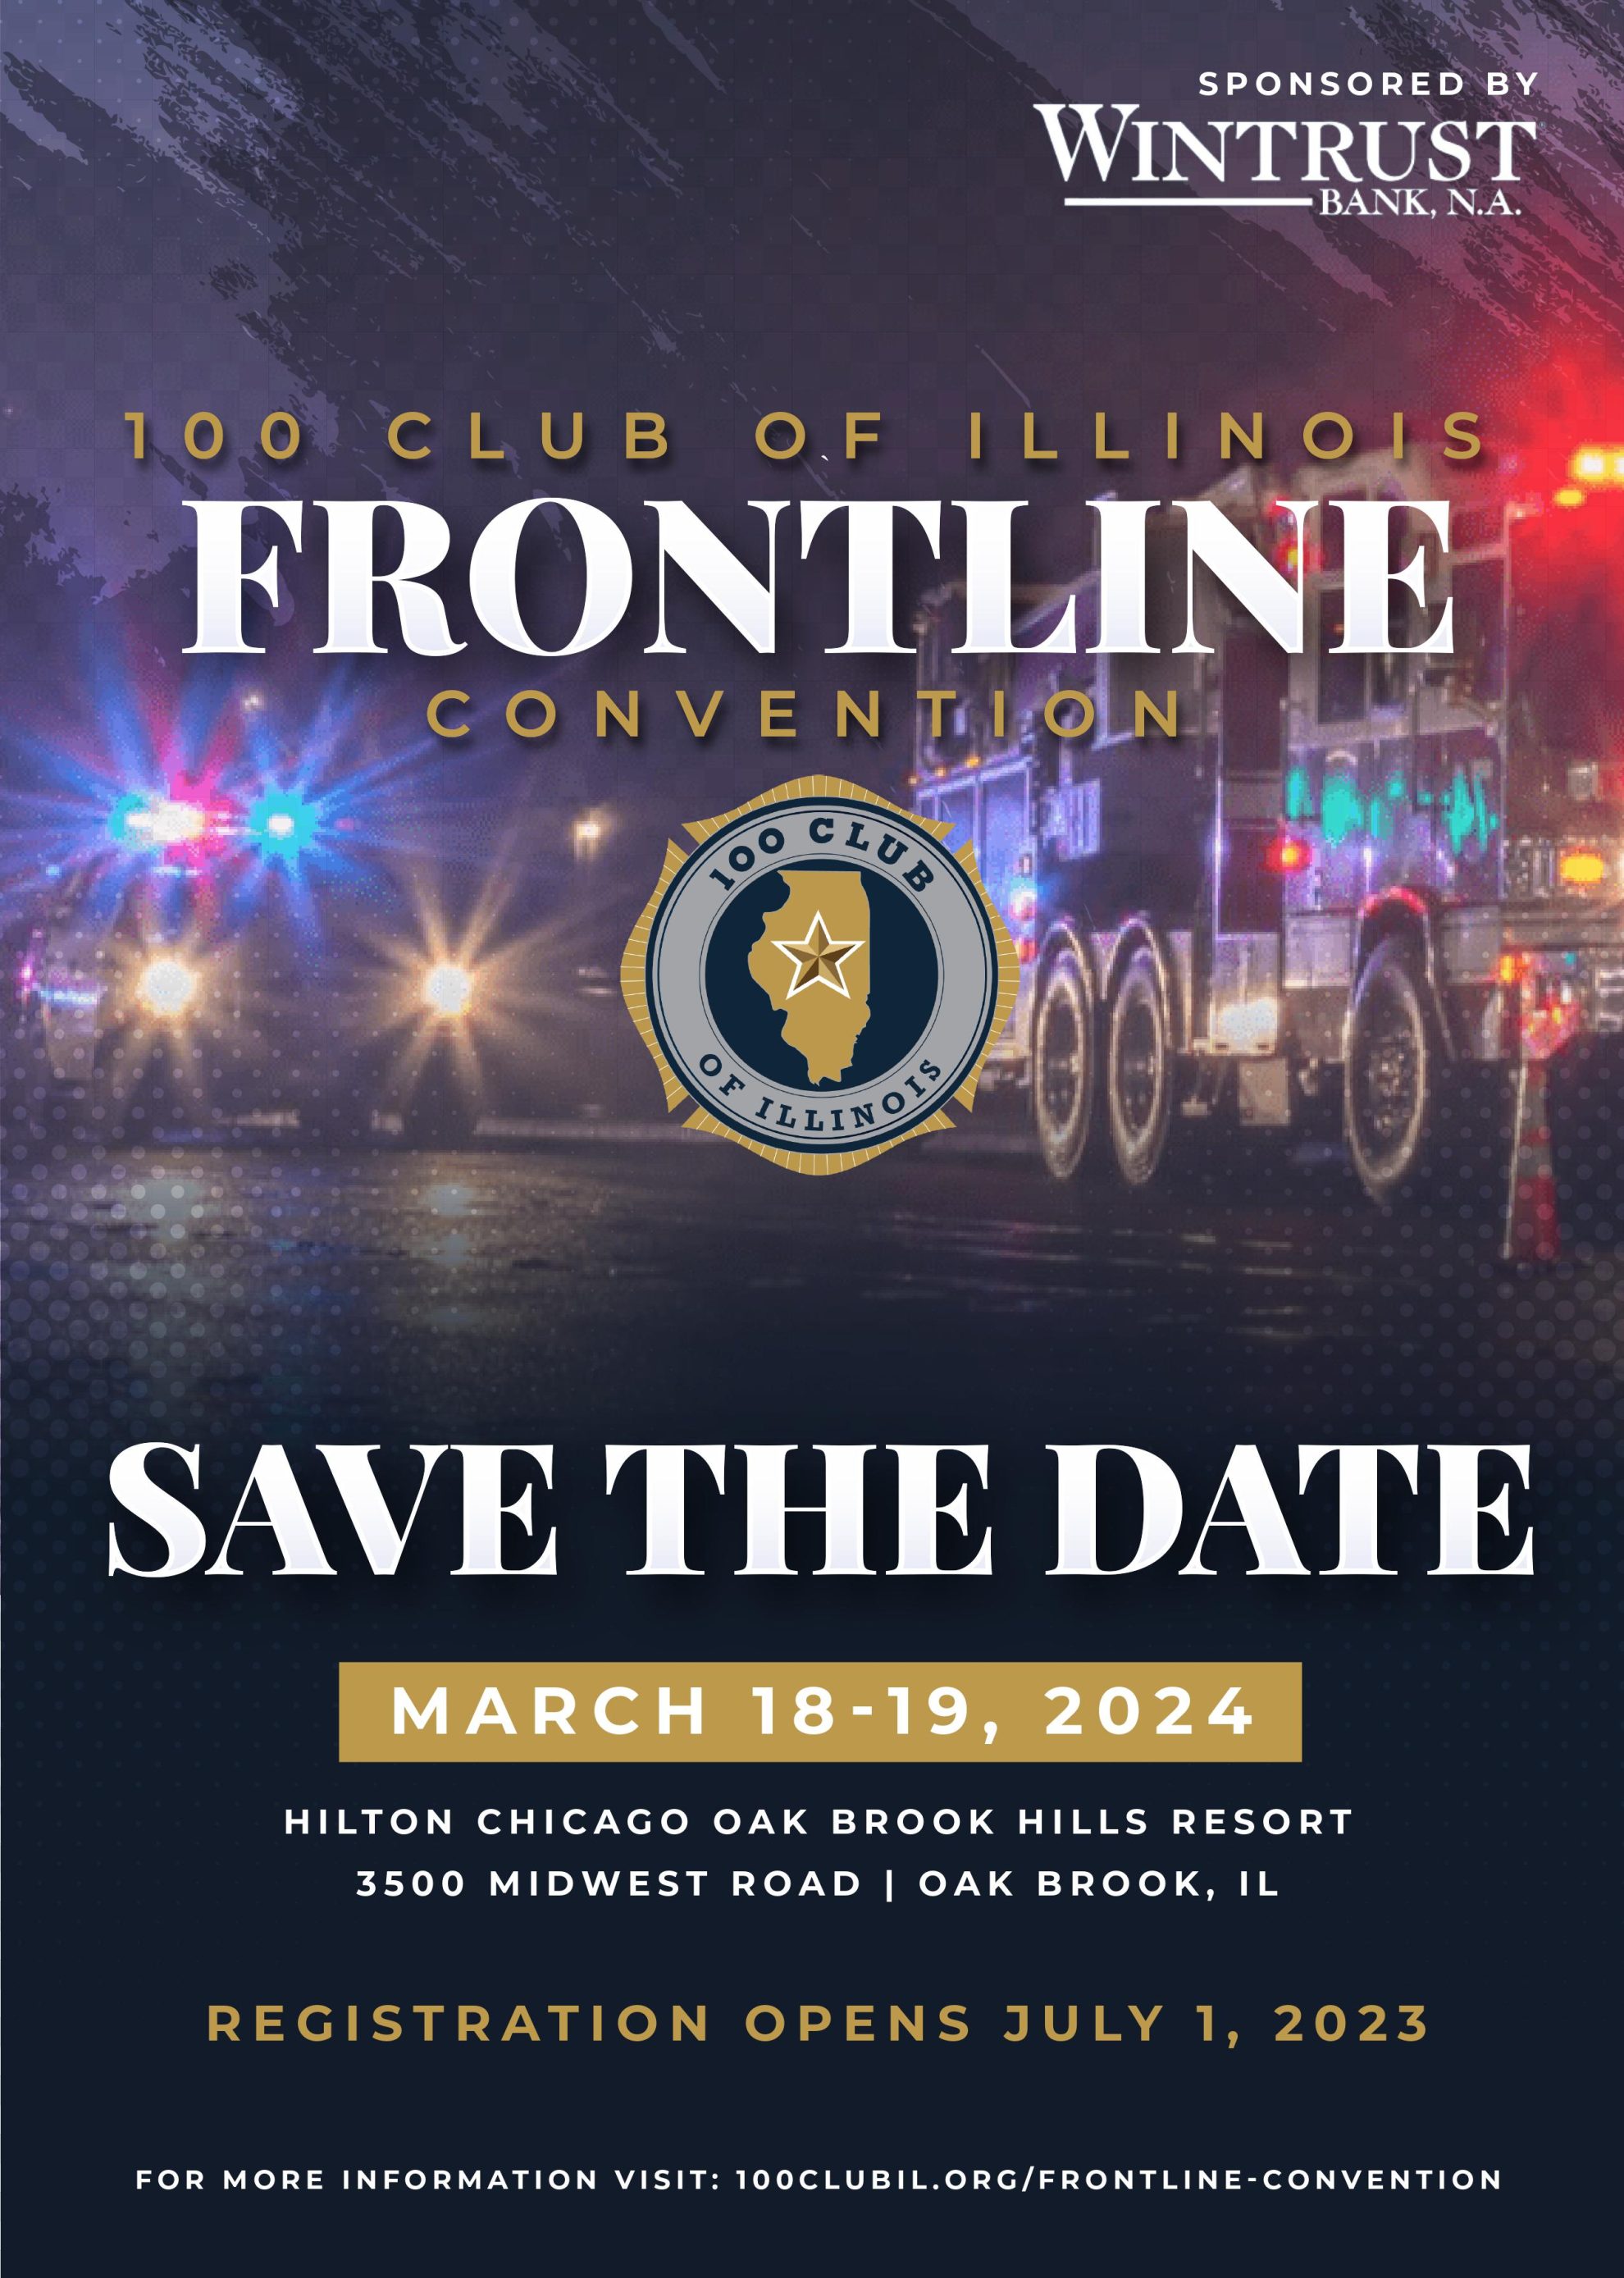 2024-frontline-convention-100-club-of-illinois-illinois-fraternal-order-of-police